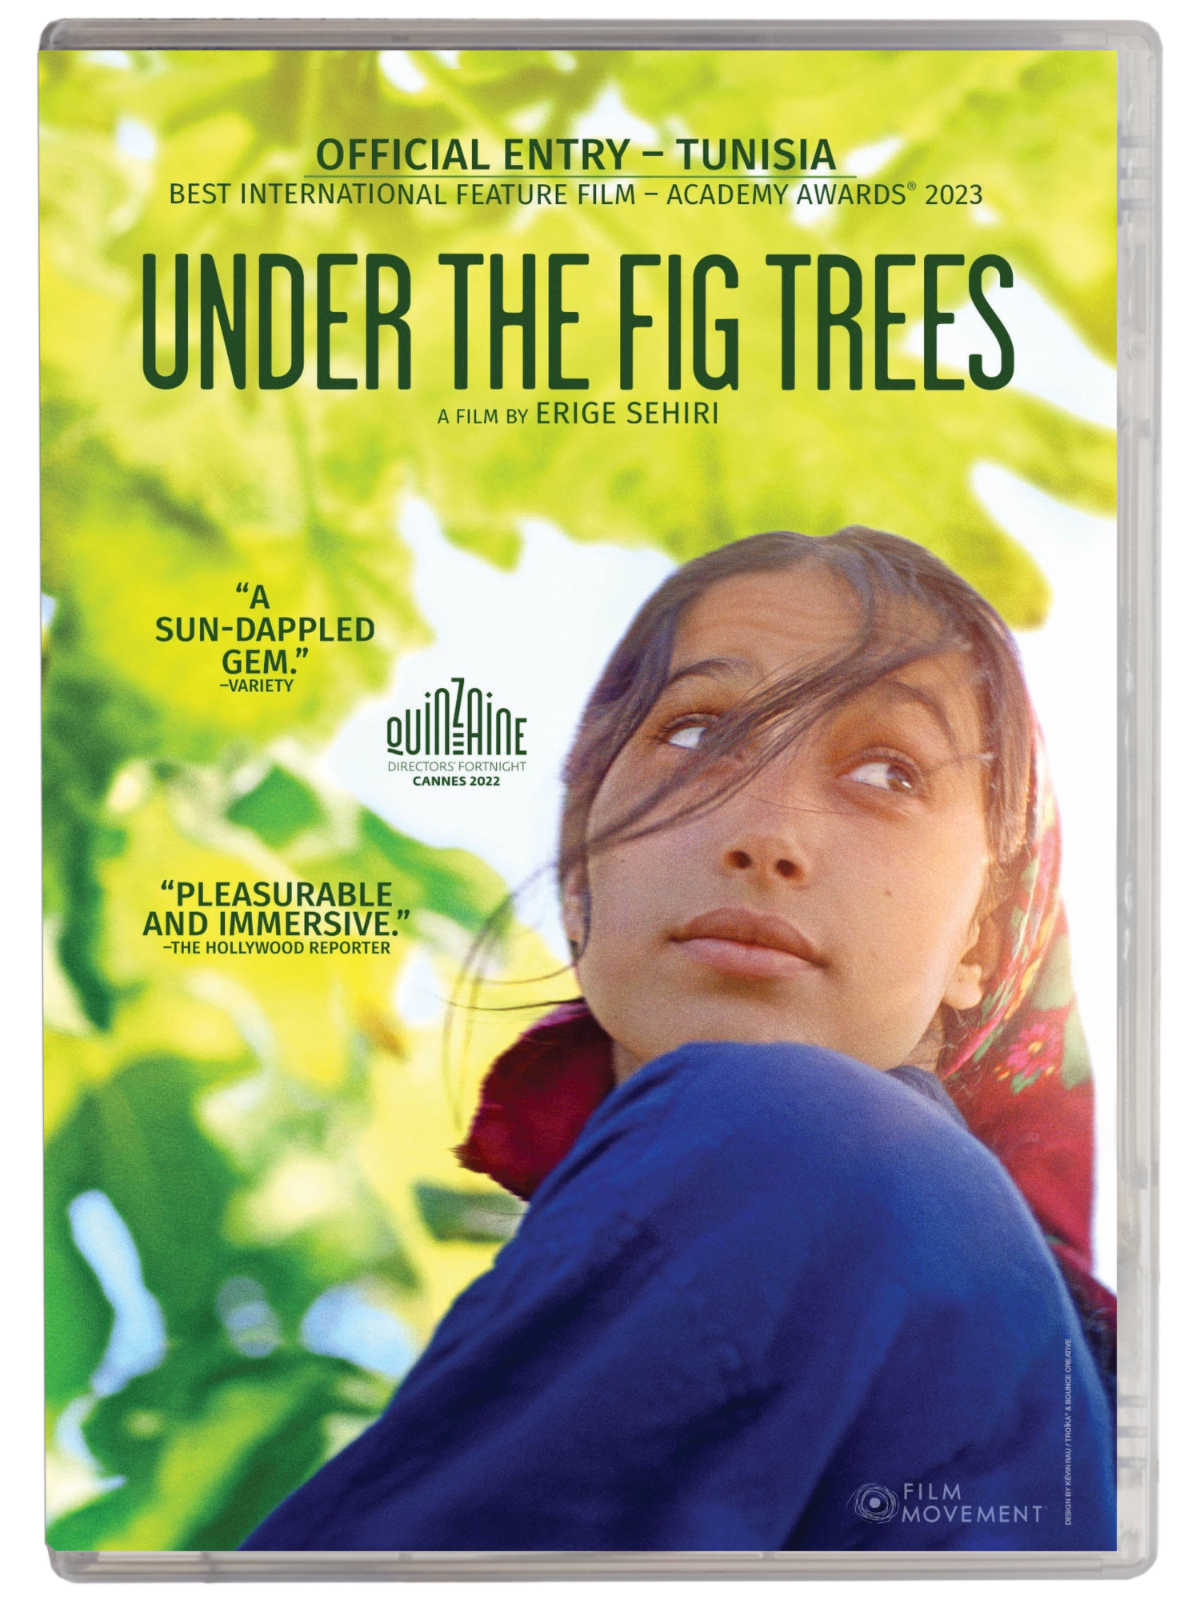 Escape to the sun-drenched orchards of Tunisia with "Under the Fig Trees" on DVD. Witness the lives, loves, and laughter of a diverse group of fig pickers as they navigate work, relationships, and dreams as they work in the orchard.